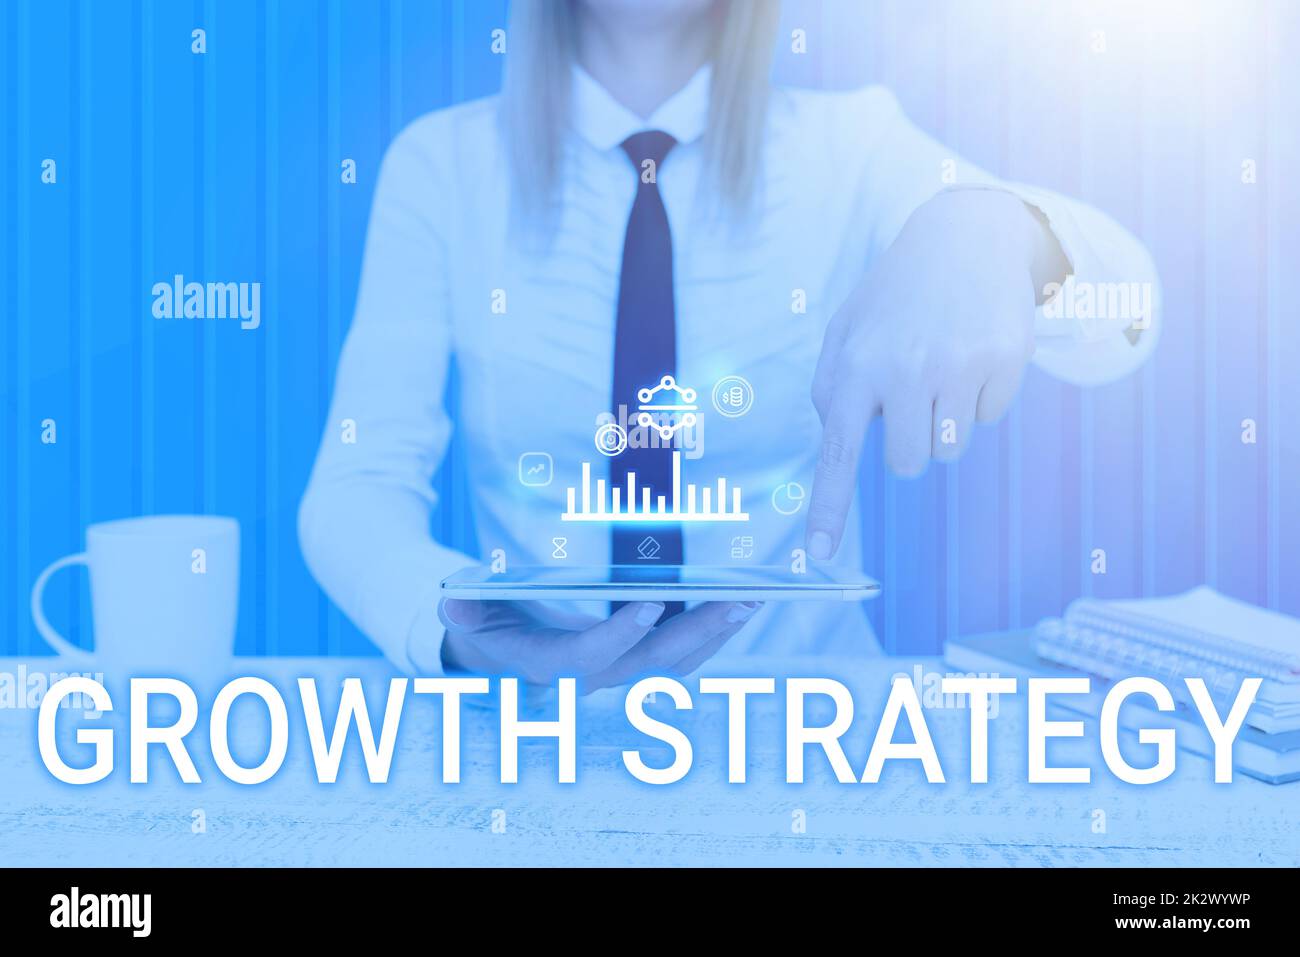 Text caption presenting Growth Strategy. Business approach Strategy aimed at winning larger market share in shortterm Man holding Screen Of Mobile Phone Showing The Futuristic Technology. Stock Photo